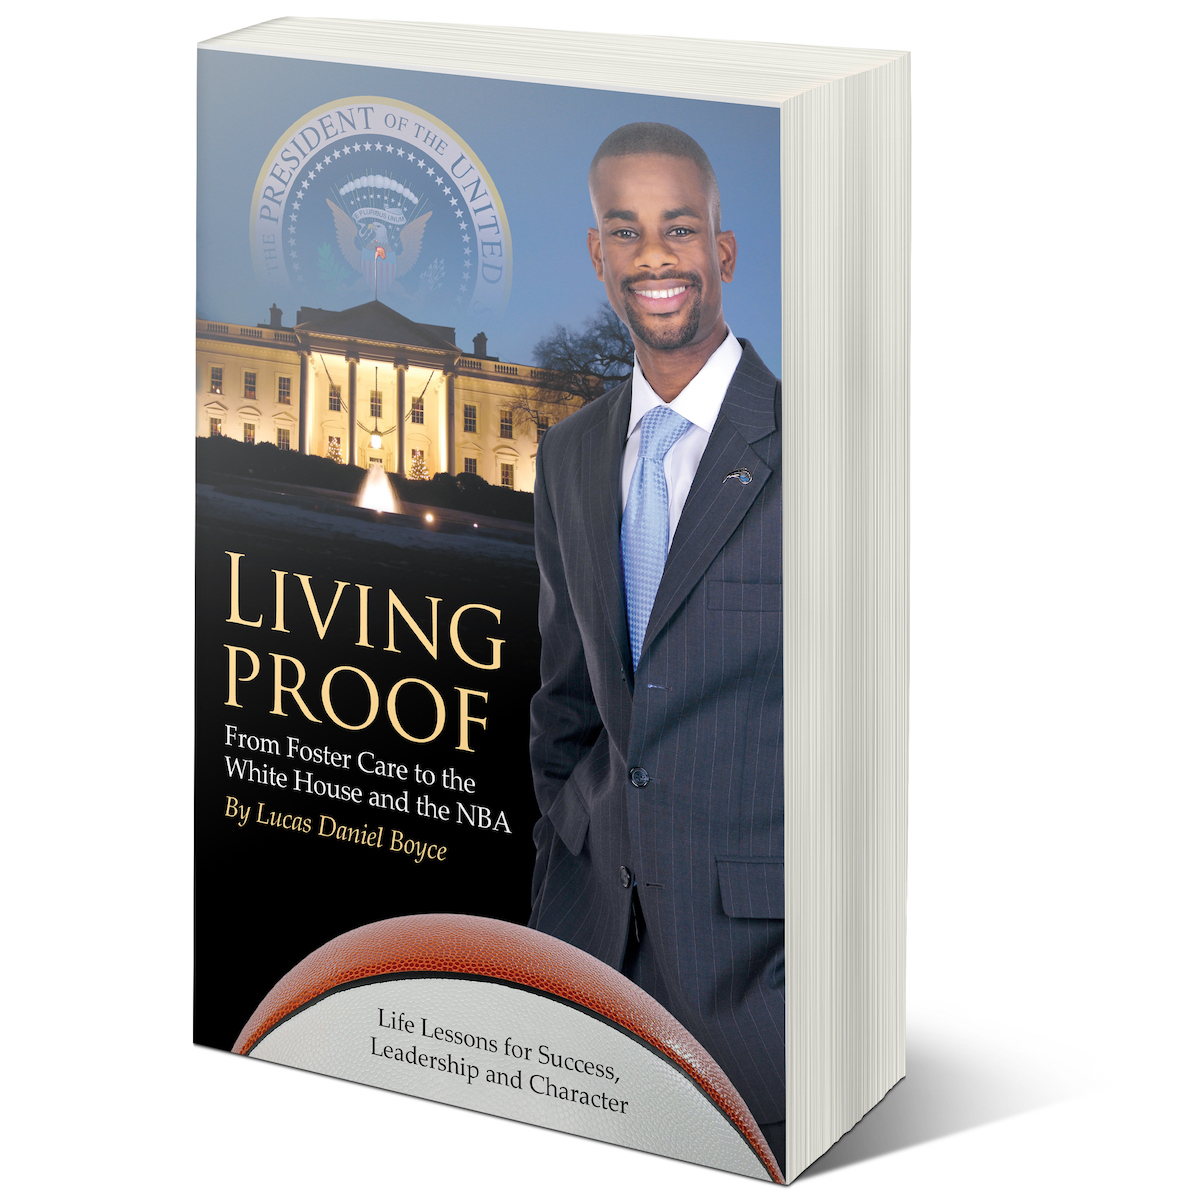 Living Proof: From Foster Care to the White House and NBA